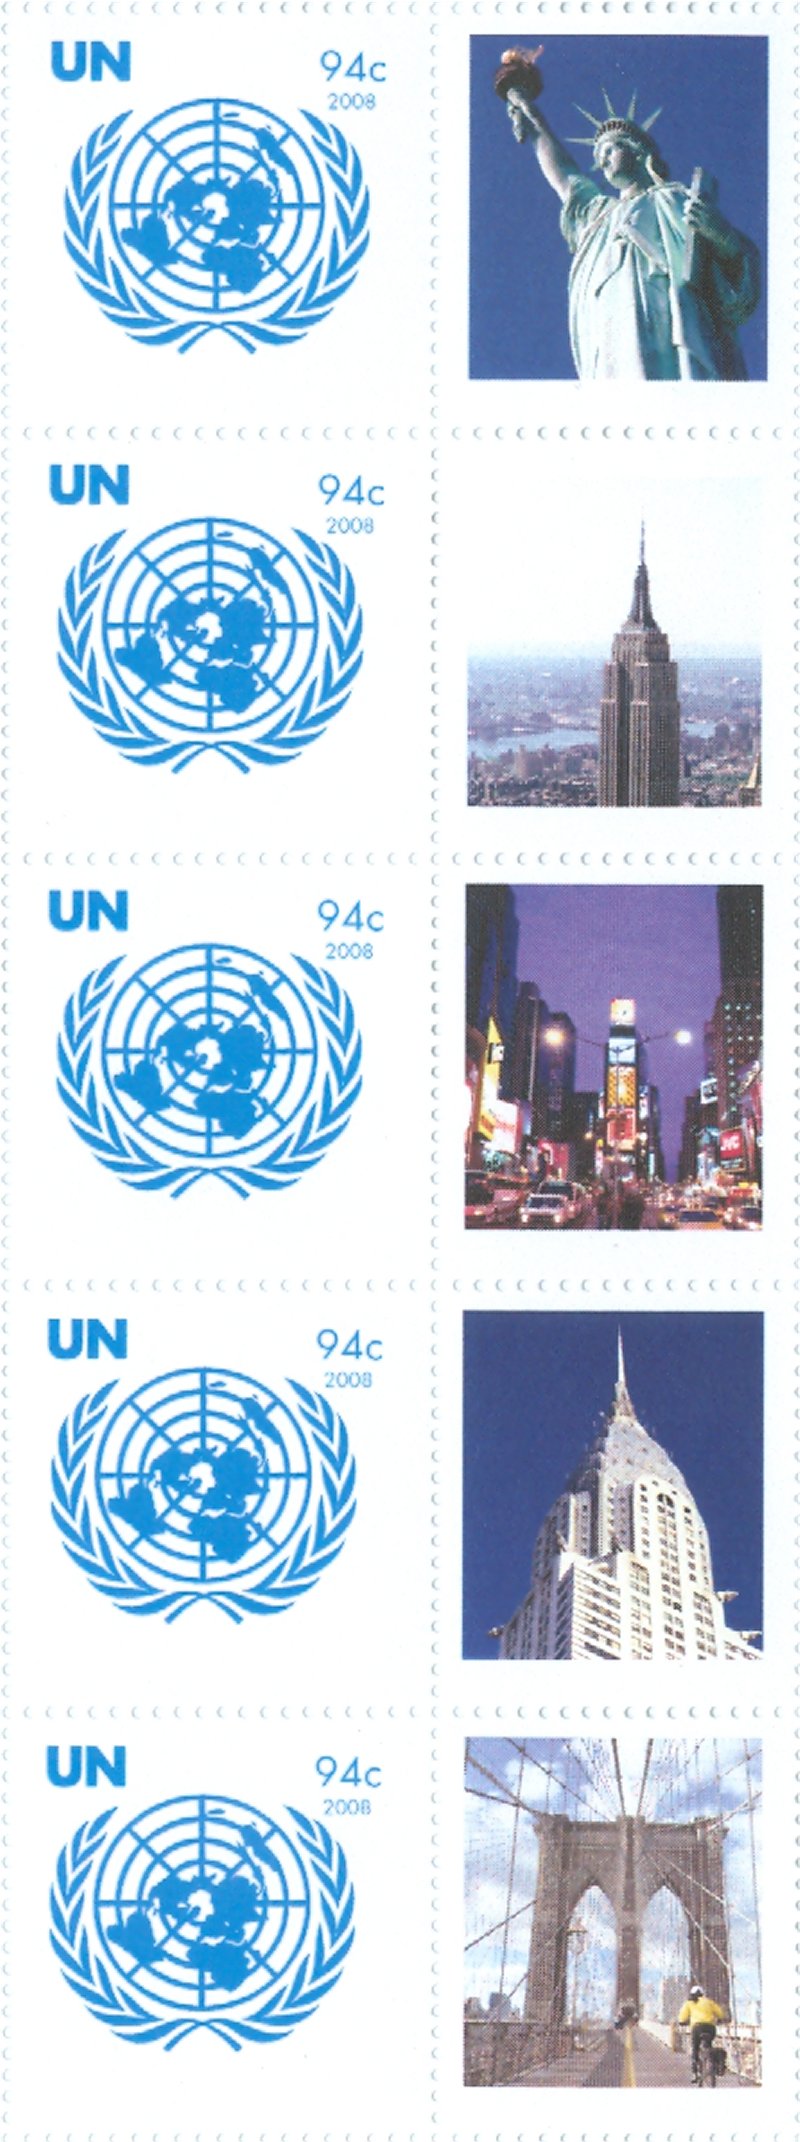 UNNY 959 94c Personalized stamp single with tab #ny959nhtab